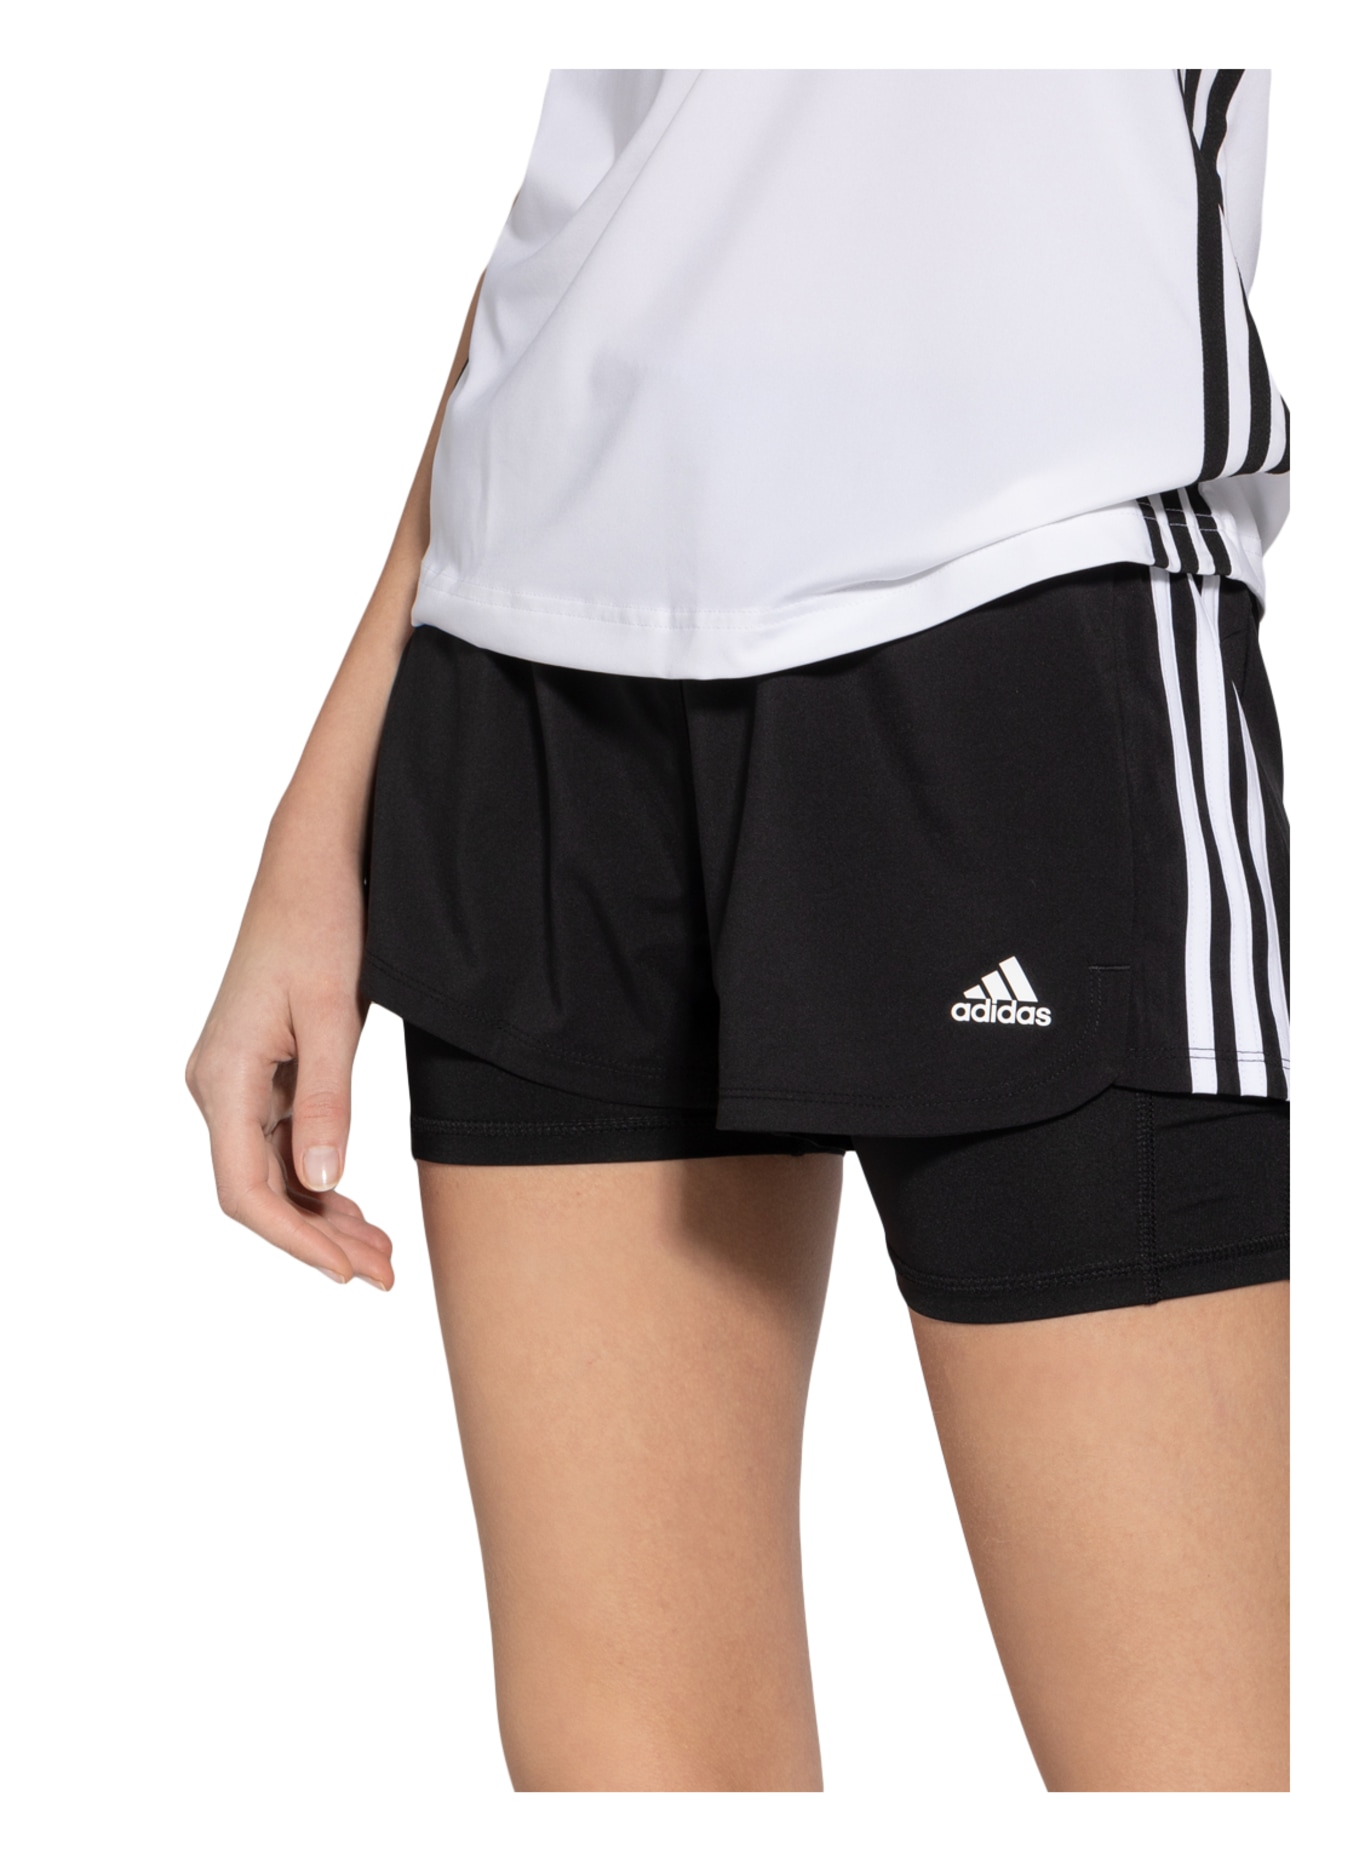 adidas 2-in-1 shorts PACER, Color: BLACK/ WHITE (Image 5)